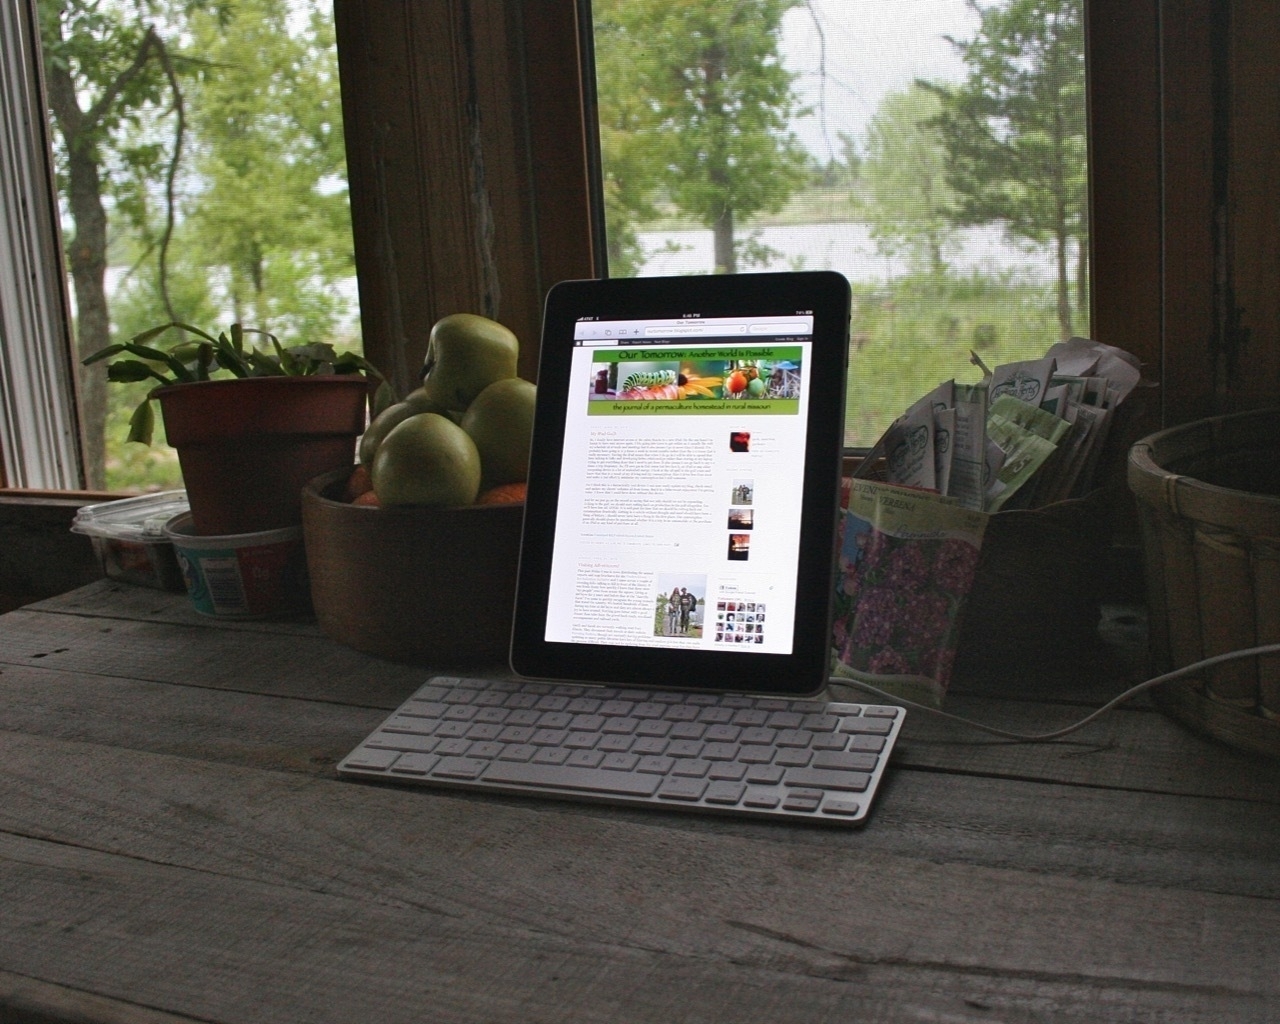 An  original iPad docked in Apple's Keyboard Stand sitting on a rustic wood table 